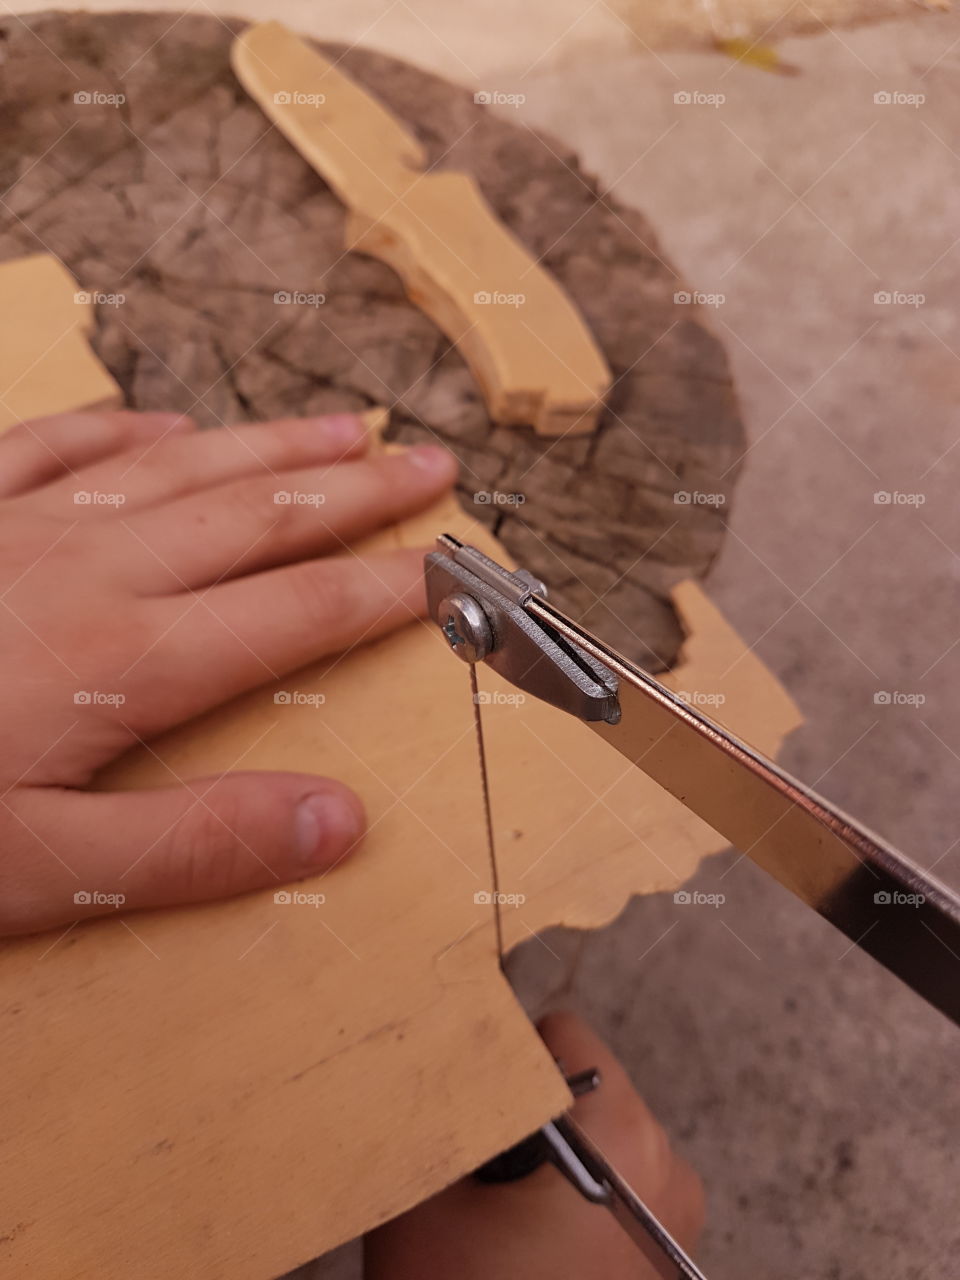 sawing a piece of wooden plywood with a jig saw